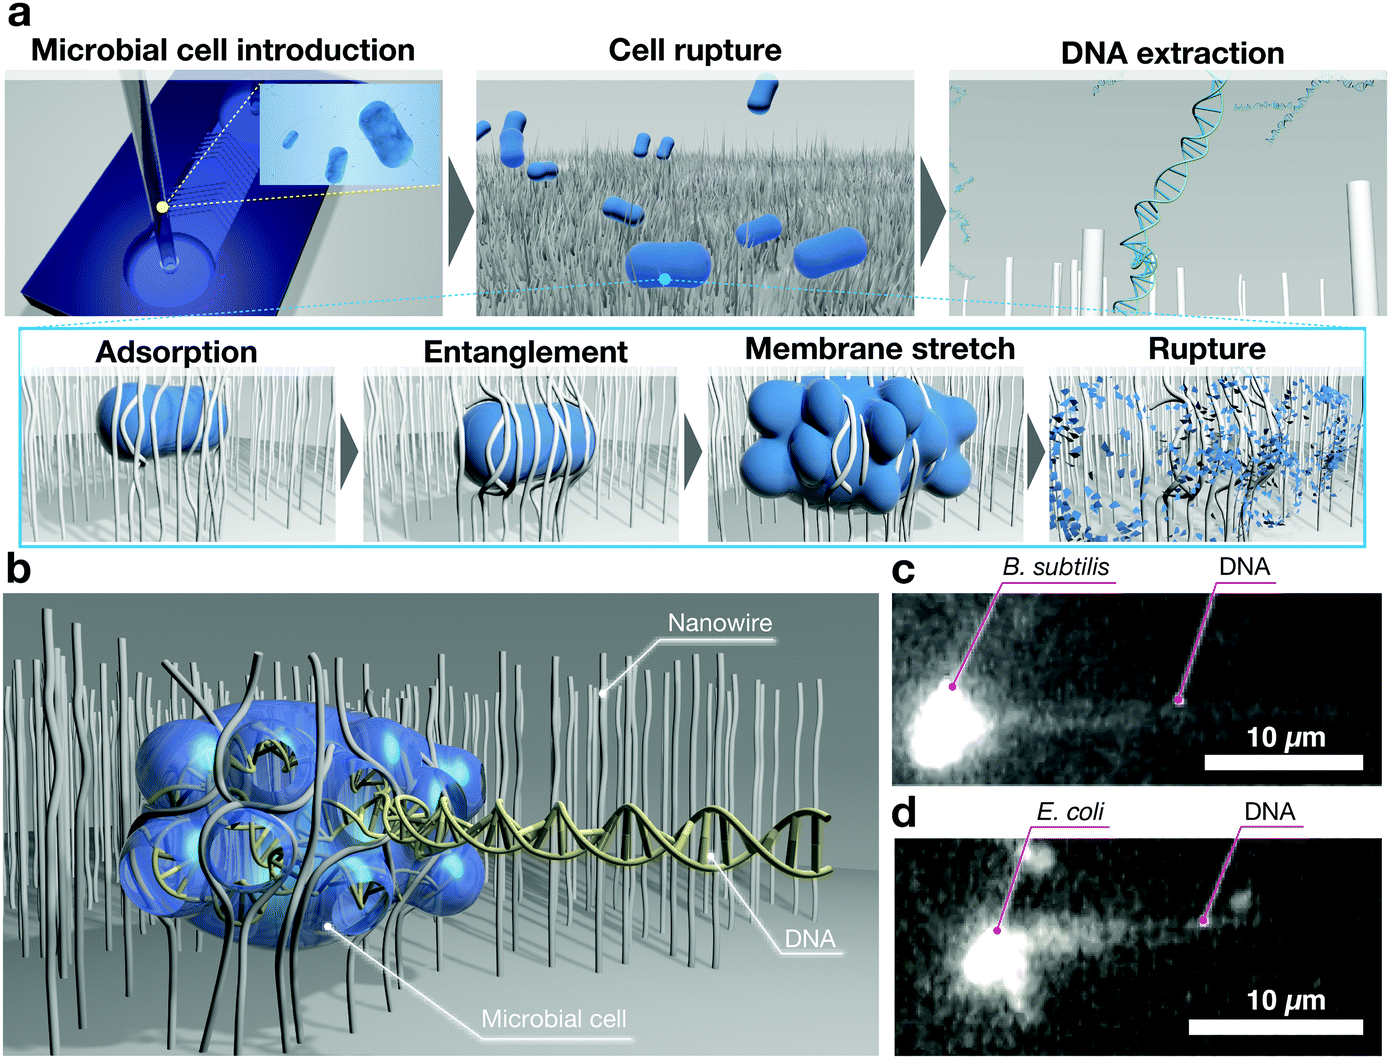 (a) Schematic of DNA extraction in microbial cells. The adsorbed cells on nanowires are ruptured by nanowire-entanglement and membrane stretching.63 (b–d) Schematic diagram of the moment of DNA extraction via nanowire-entanglement, and snapshots of fluorescence images of DNA extraction from B. subtilis and E. coli.63